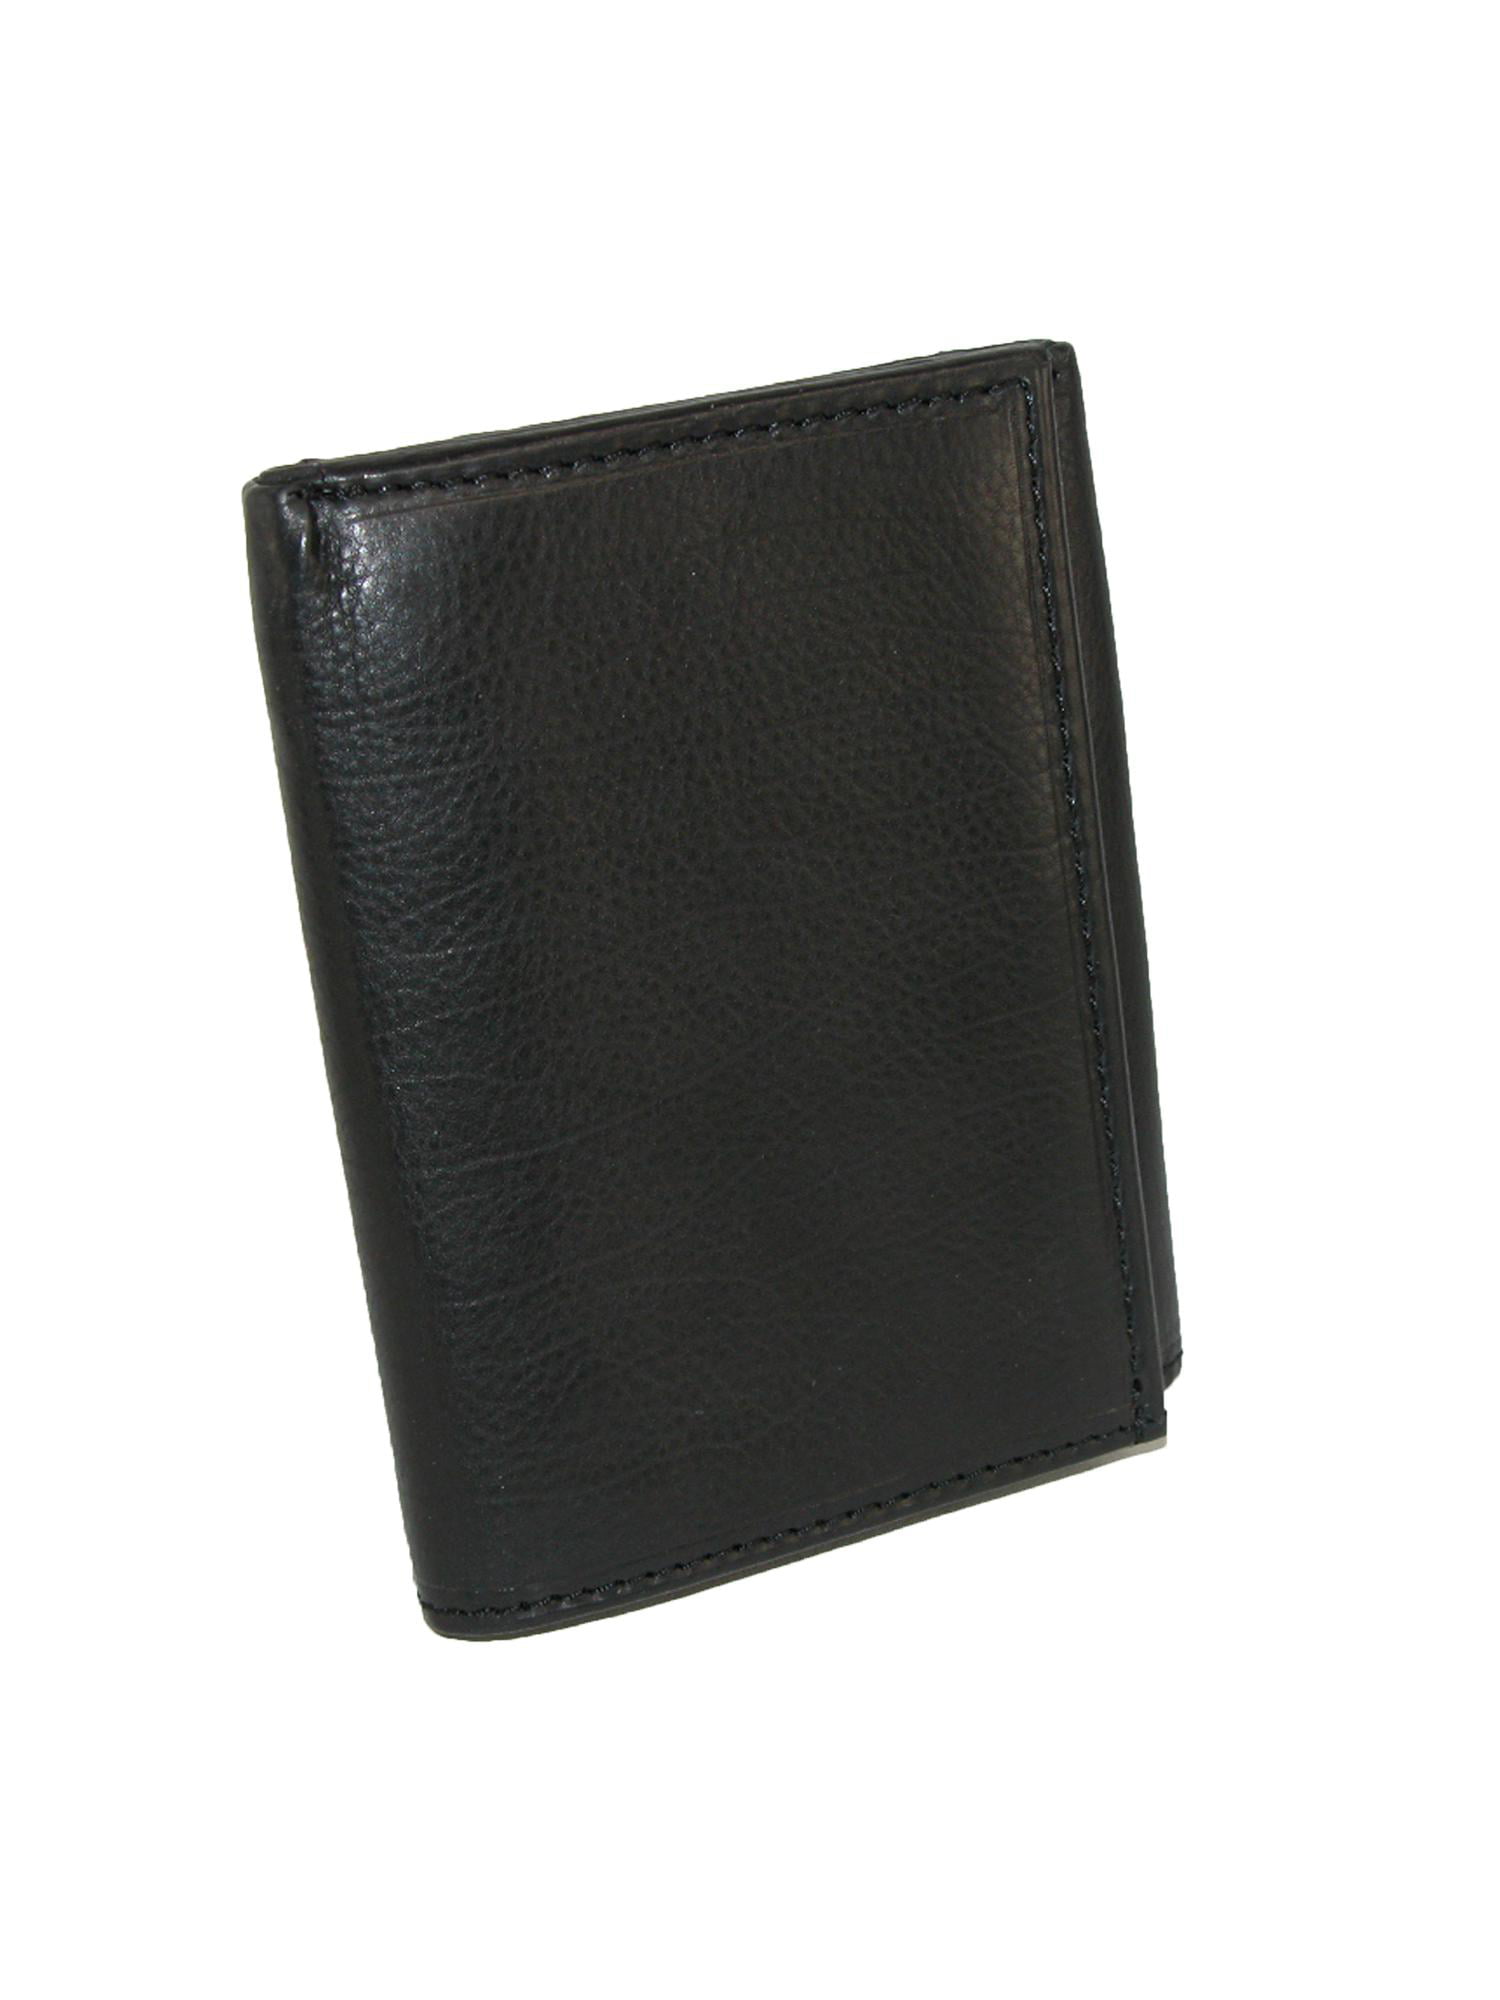 Black Textured Leather Police Badge And ID Holder Wallet Nassau County PBA 